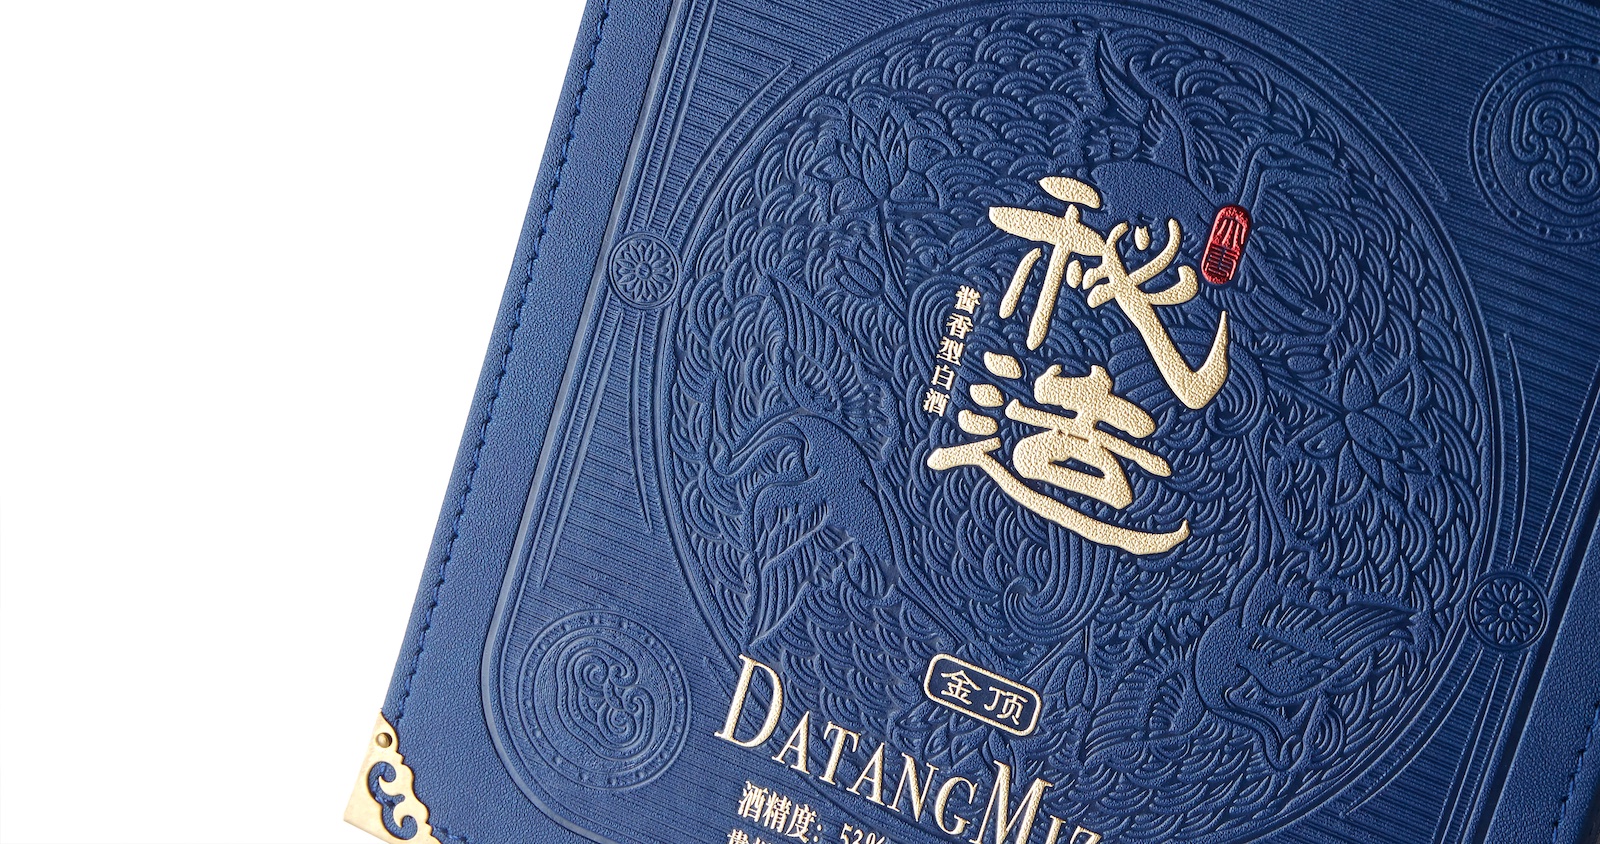 MUSE Design Winners - The Tang Dynasty MIZAO Golden Top